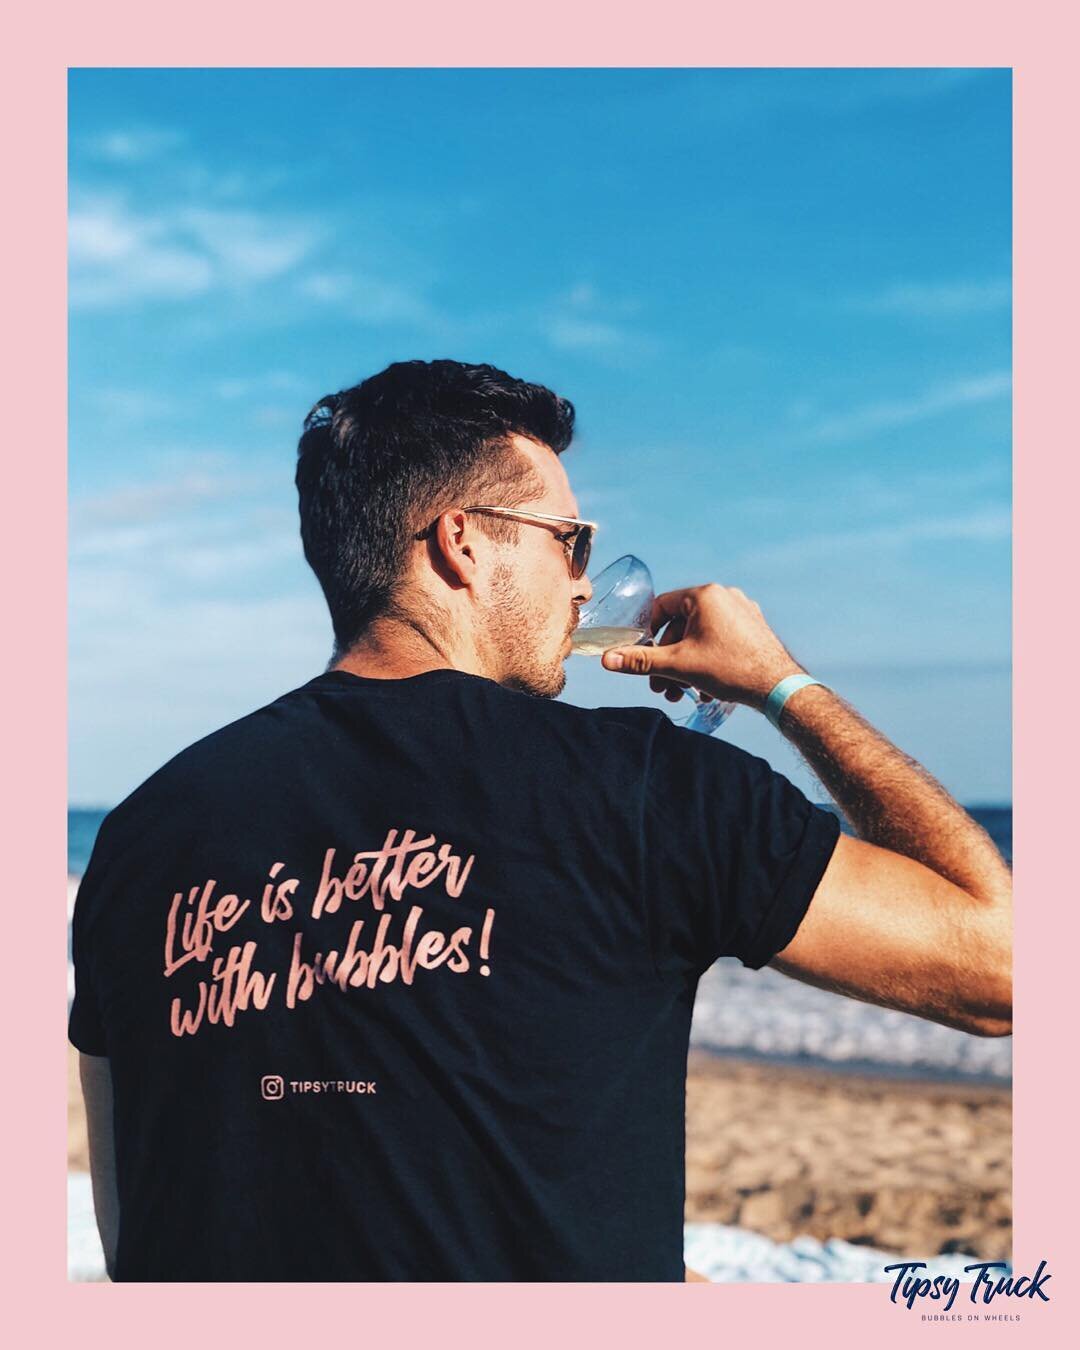 LIFE IS BETTER WITH SOME BUBBLES AT THE BEACH! 😋
🍾
🍾
#bubblesAD #lifeisbetterwithbubbles #tipsytruck #Barcelona #proseccovomfass #frizzantevomfass #wedding #weddinggoals #weddinginspo #togetherwearebetter #proseccooclock #prosecco #bubblesonwheels